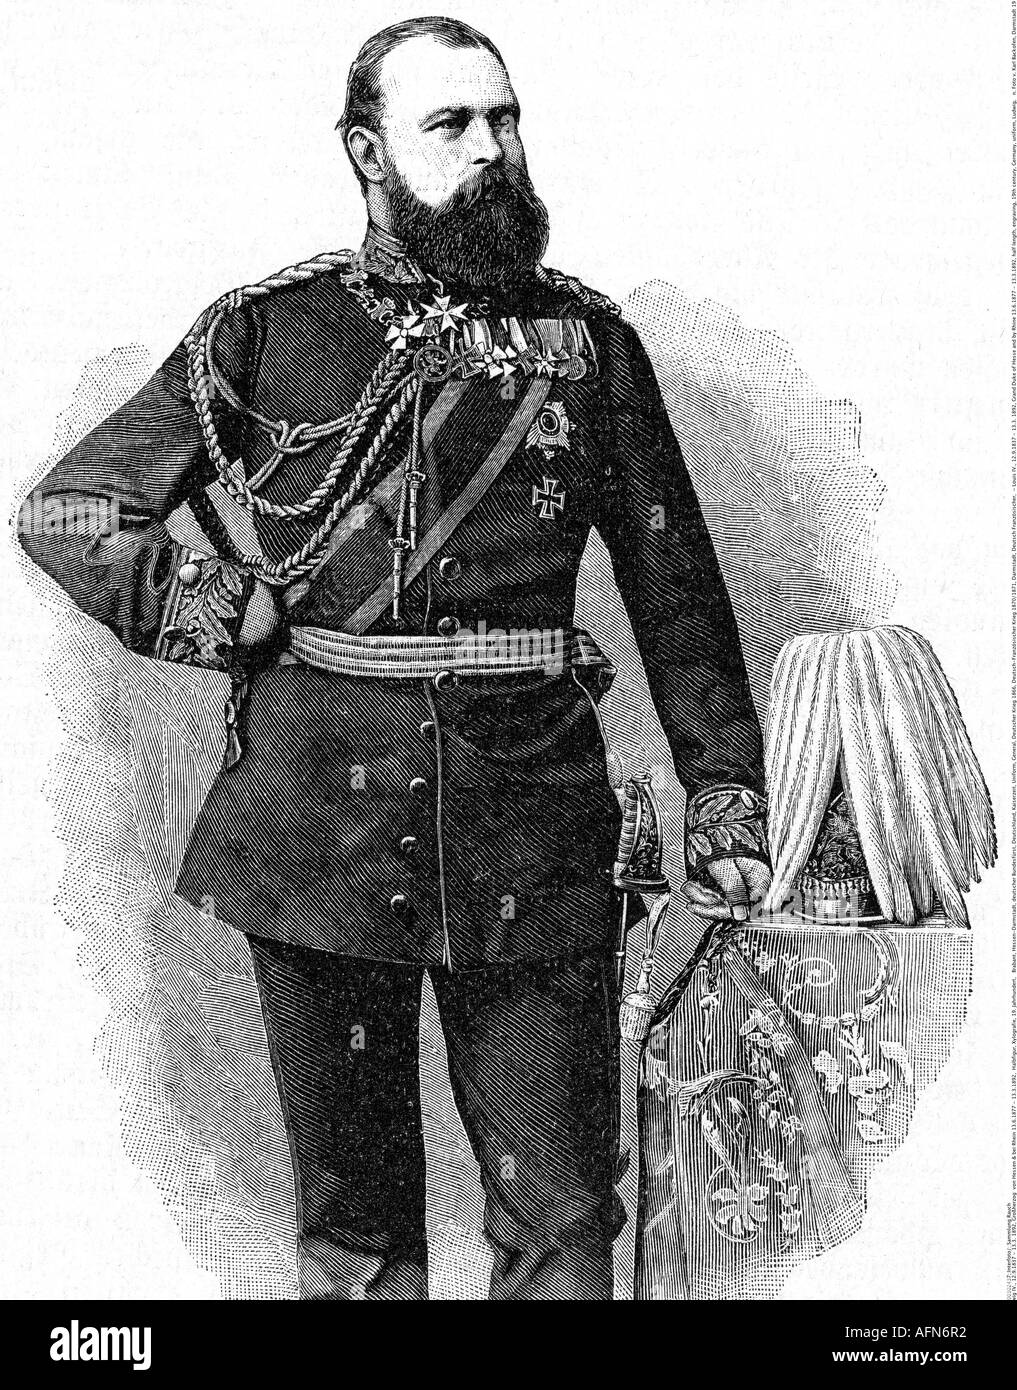 Louis IV., 12.9.1837 - 13.3. 1892, Grand Duke of Hesse and by Rhine 13.6.1877 - 13.3.1892, half length, engraving, 19th century, , Stock Photo